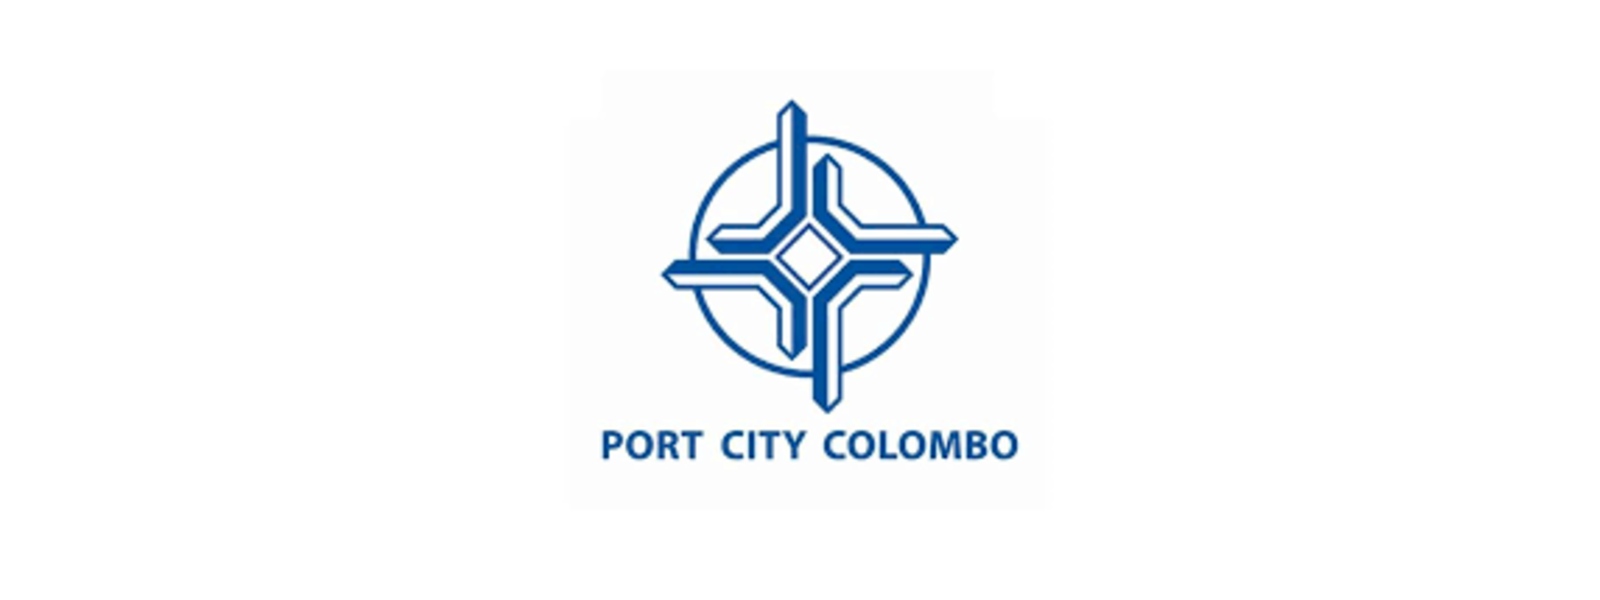 CHEC project workers exposed to COVID-19, says Port City Colombo